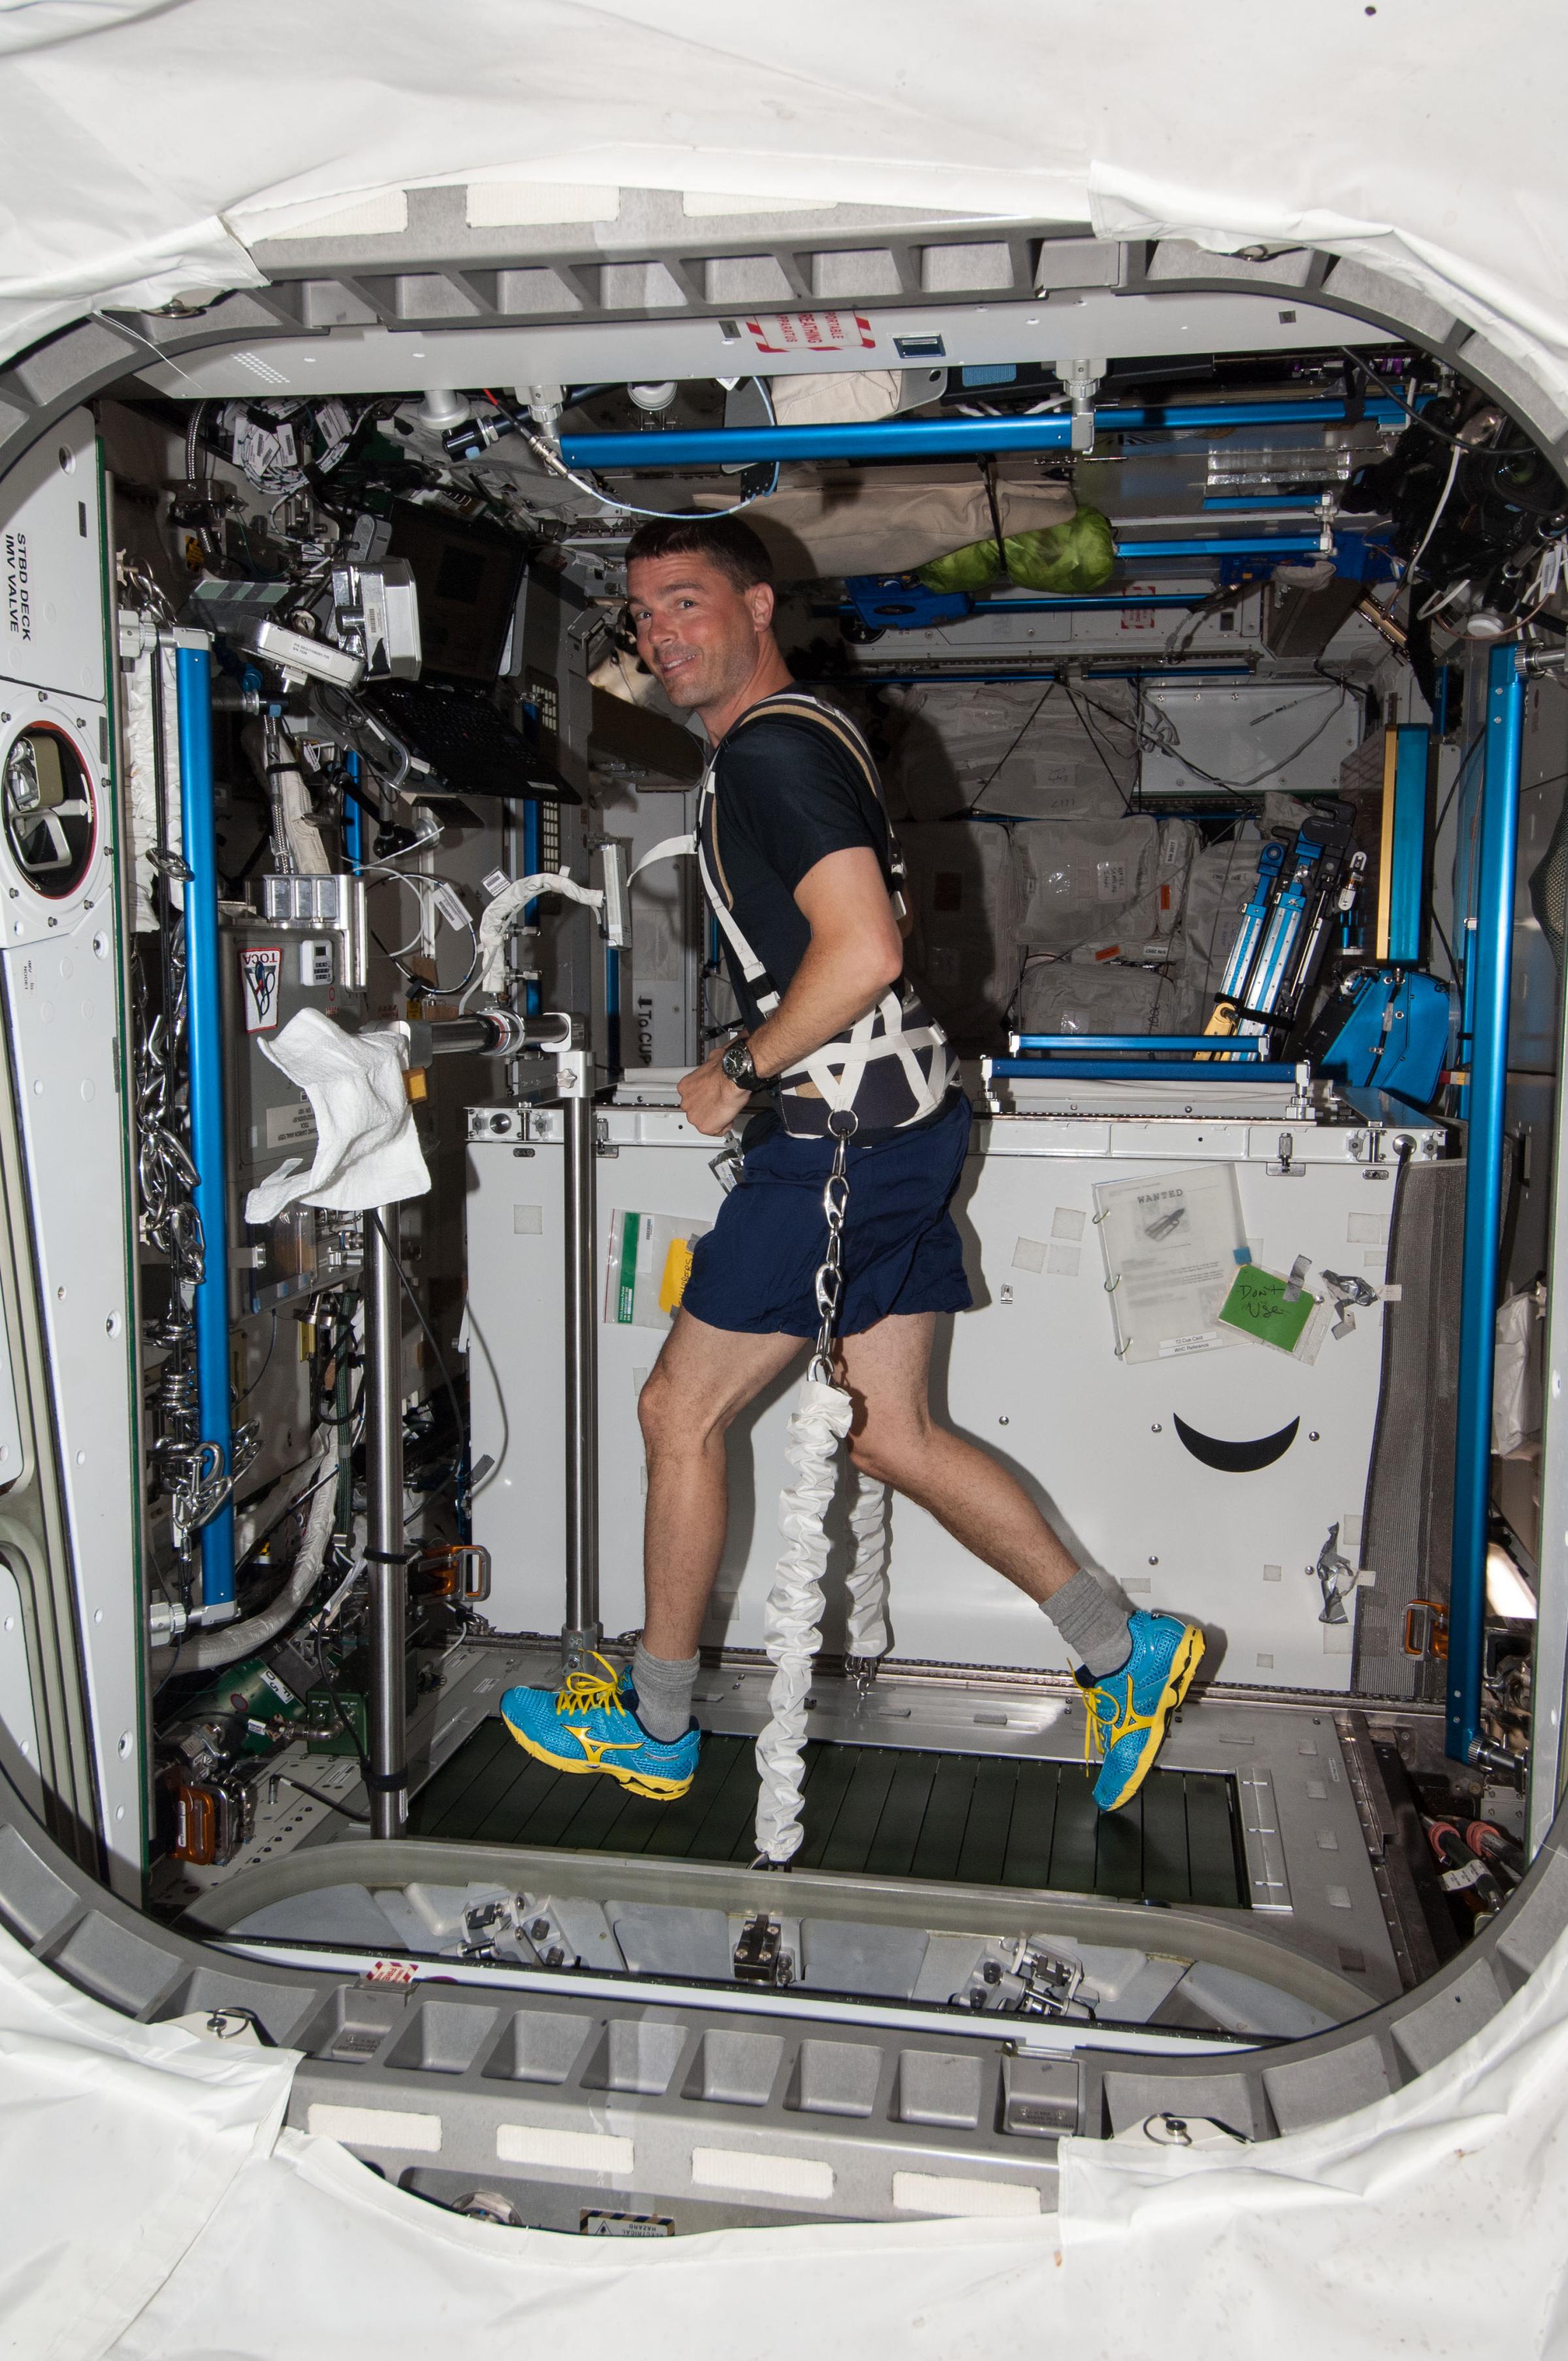 Astronaut Reid Wiseman, equipped with a bungee harness, exercises on the Combined Operational Load Bearing External Resistance Treadmill (COLBERT) in the Tranquility node of the International Space Station.